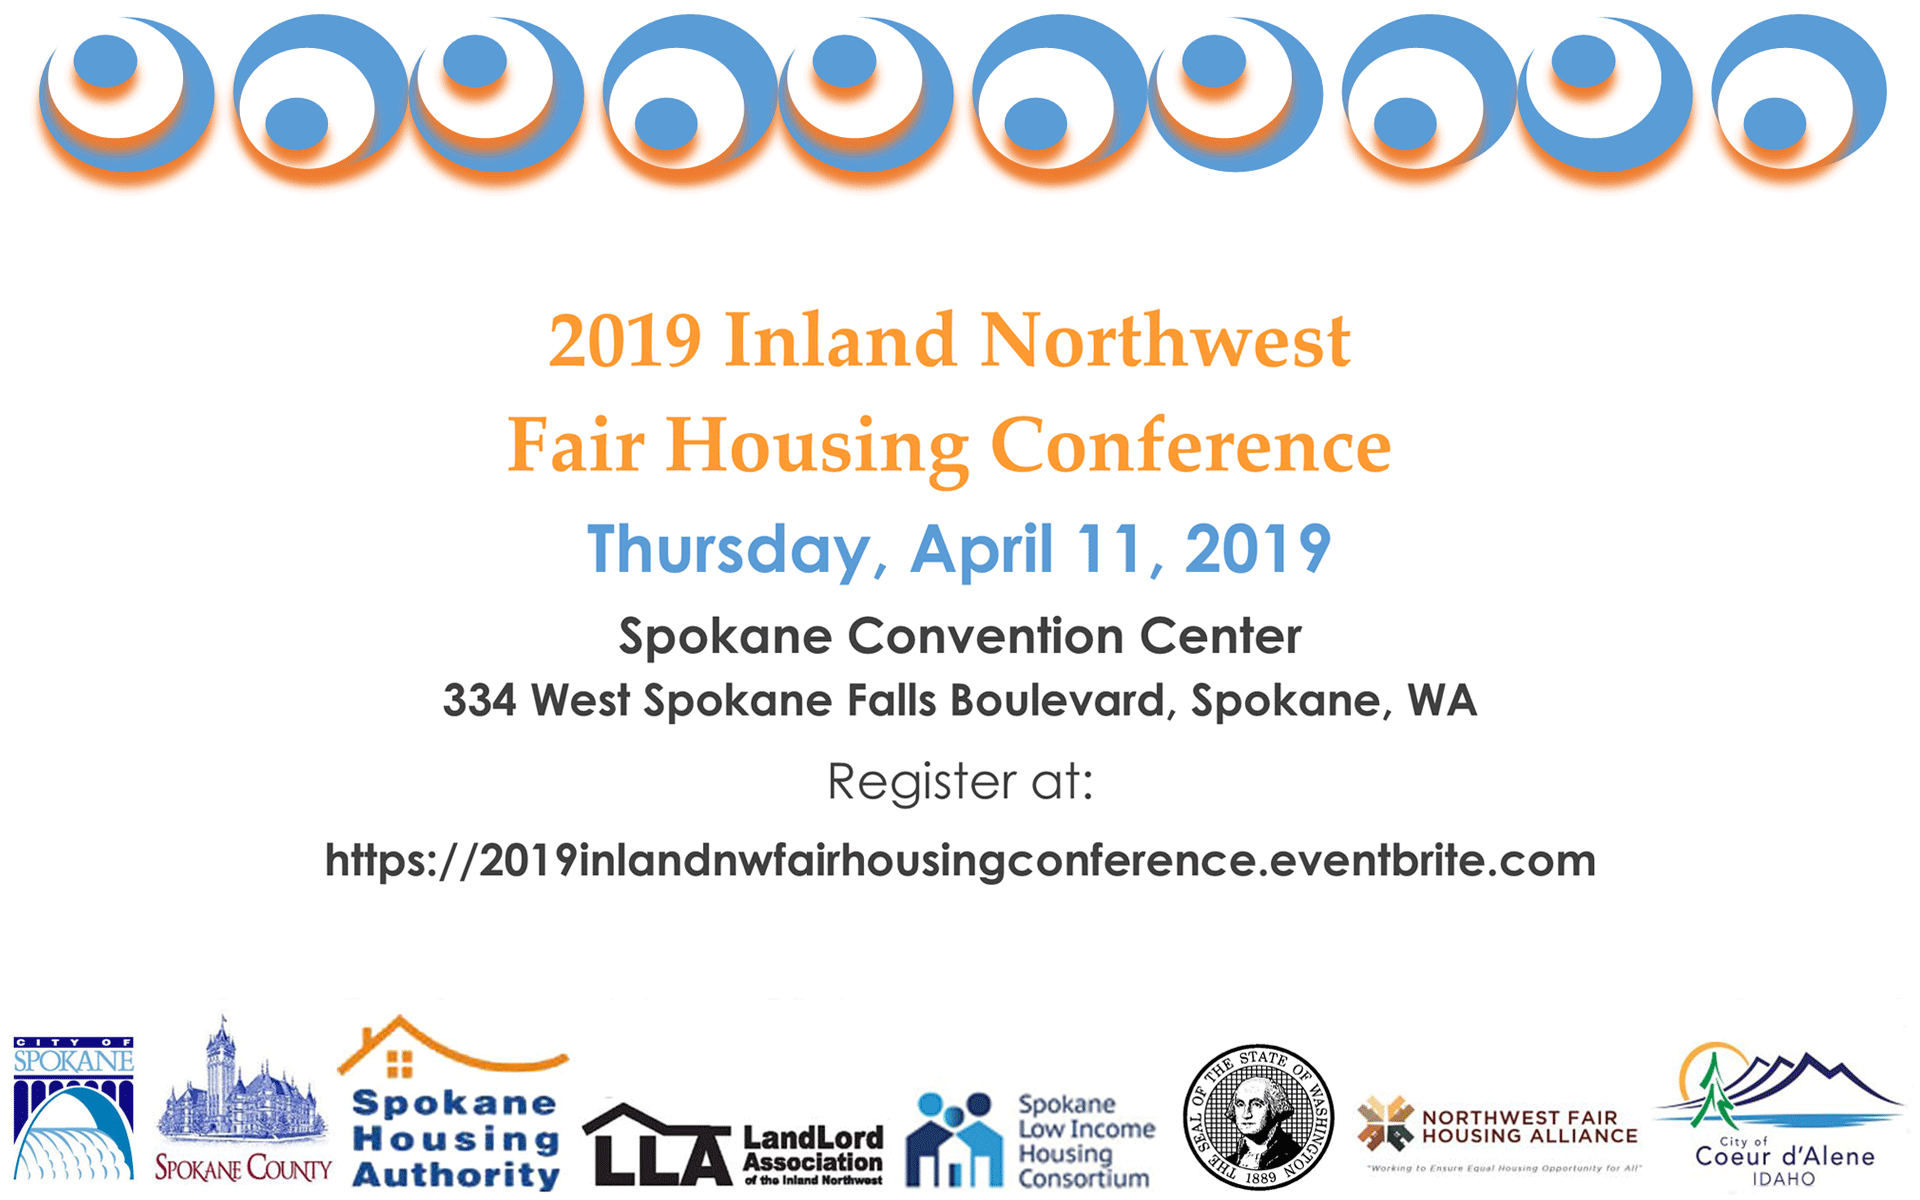 Register for the Inland Northwest Fair Housing Conference City of